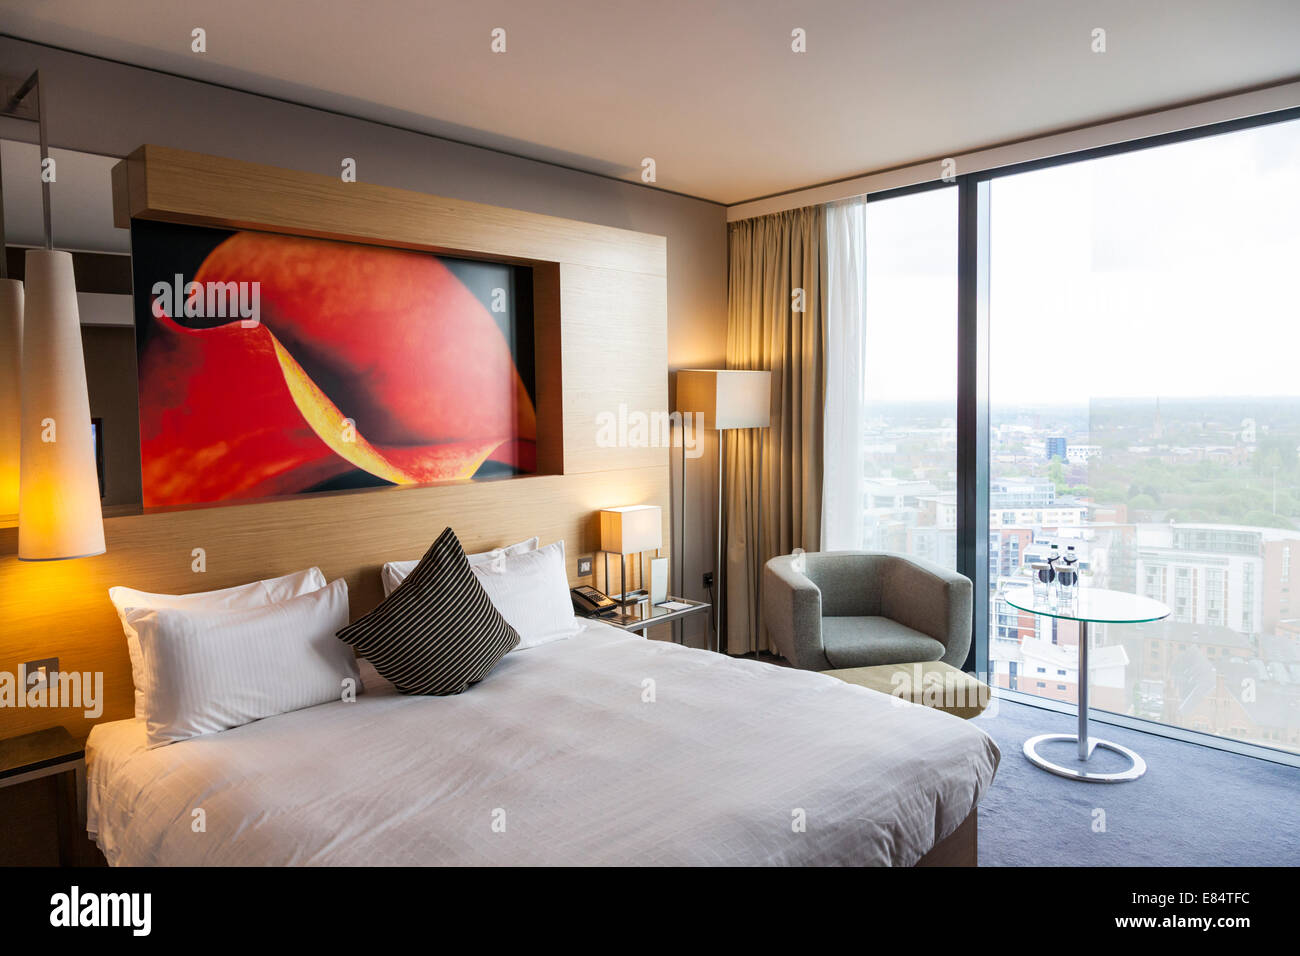 Hotel room interior at the Hilton Deansgate Hotel in Manchester, England, UK Stock Photo